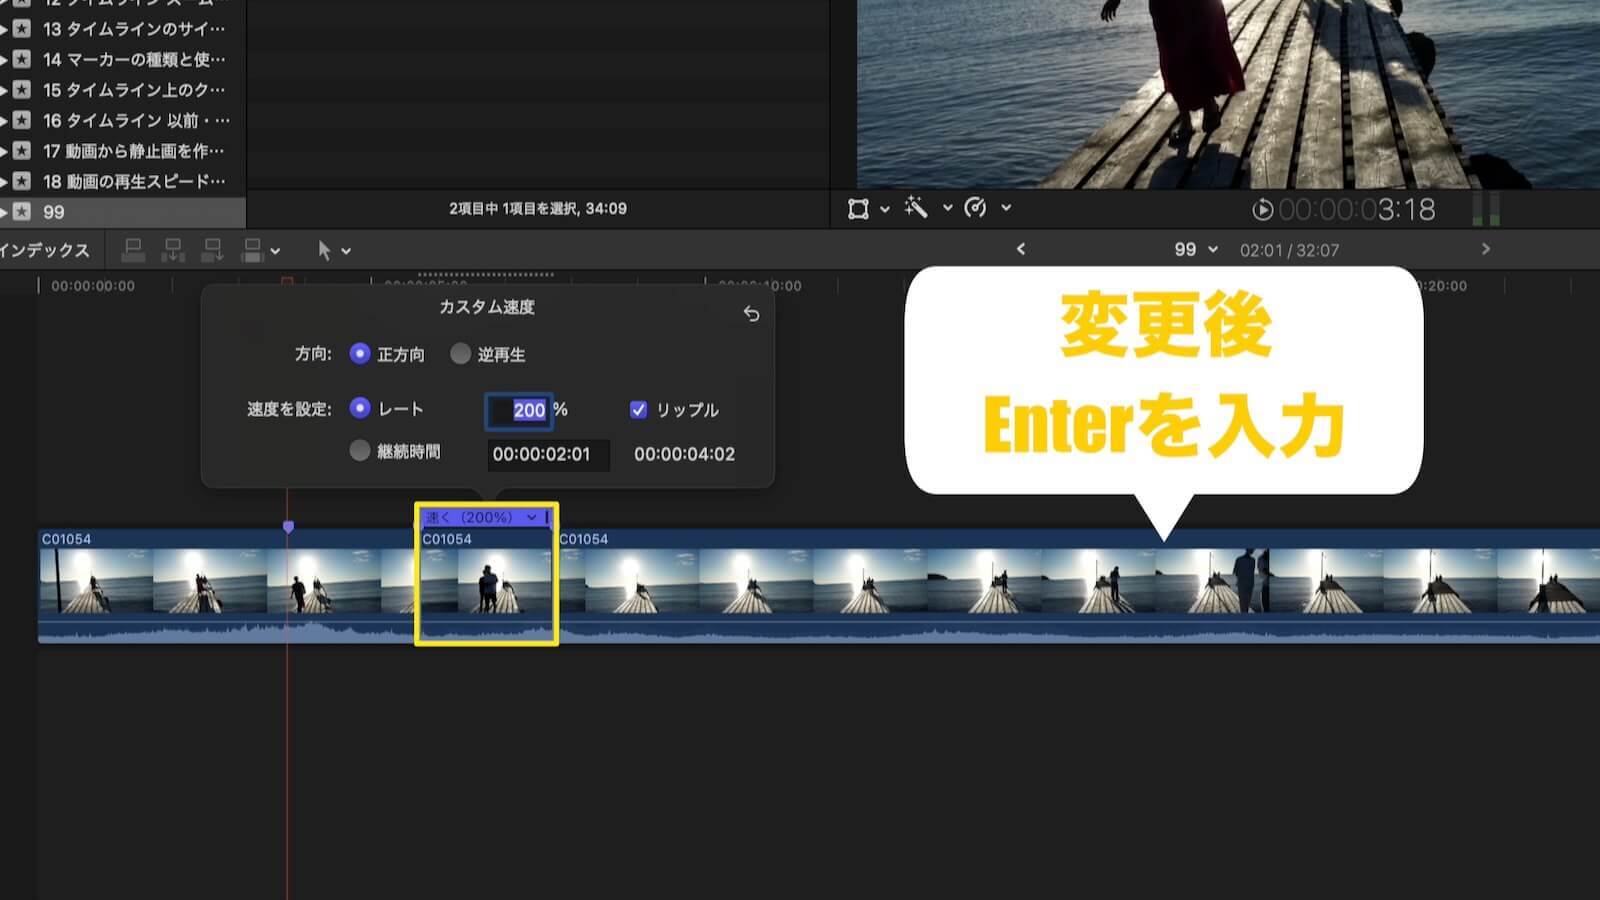 Final Cut Pro playback speed changed from 100% to 200%